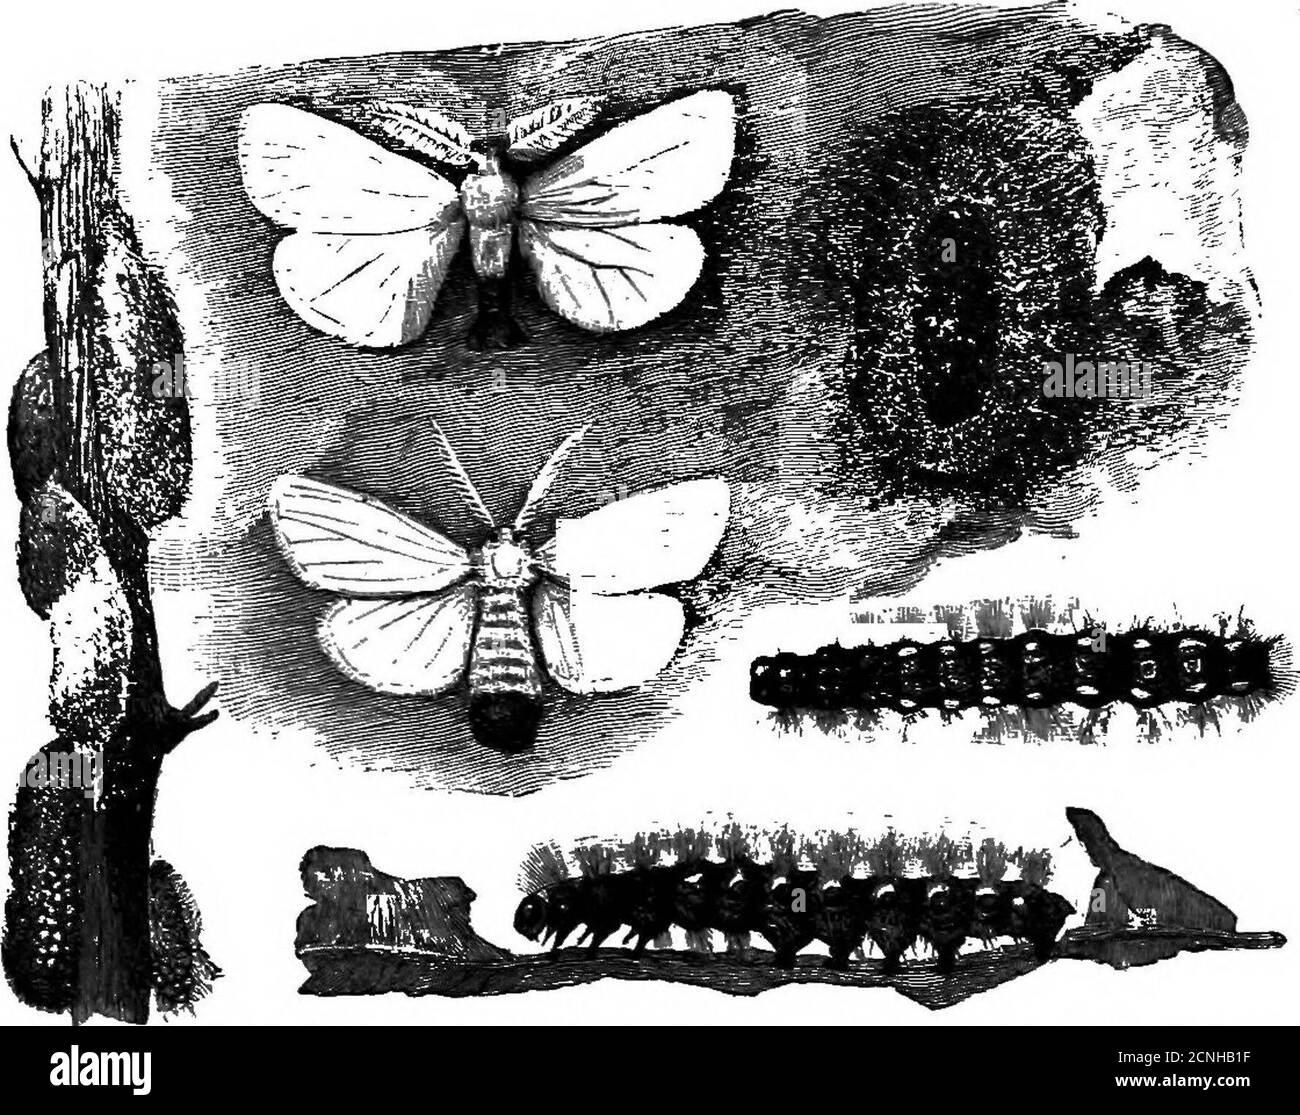 . Food habits of the grosbeaks . Fig. 30.—Gipsy moth caterpillar (Porthetria dispar).(From Bureau of Entomology.) BOSEBEEAST VS. SCALE INSECTS. 53 fruits, are most seriously affected, while shade and forest trees alsosuffer greatly. Thirty-three of the rosebreasts examined had eaten scale insects,fouridnds of which were identified. The plum scale {Eulecaniumeerasifex), which is an occasional pest on cherry, apple, and pear,besides the tree from which it is named, seems to be relished. Afemale grosbeak collected in Indiana in May had consumed 36 plumscales, which constituted 95 percent of its f Stock Photo